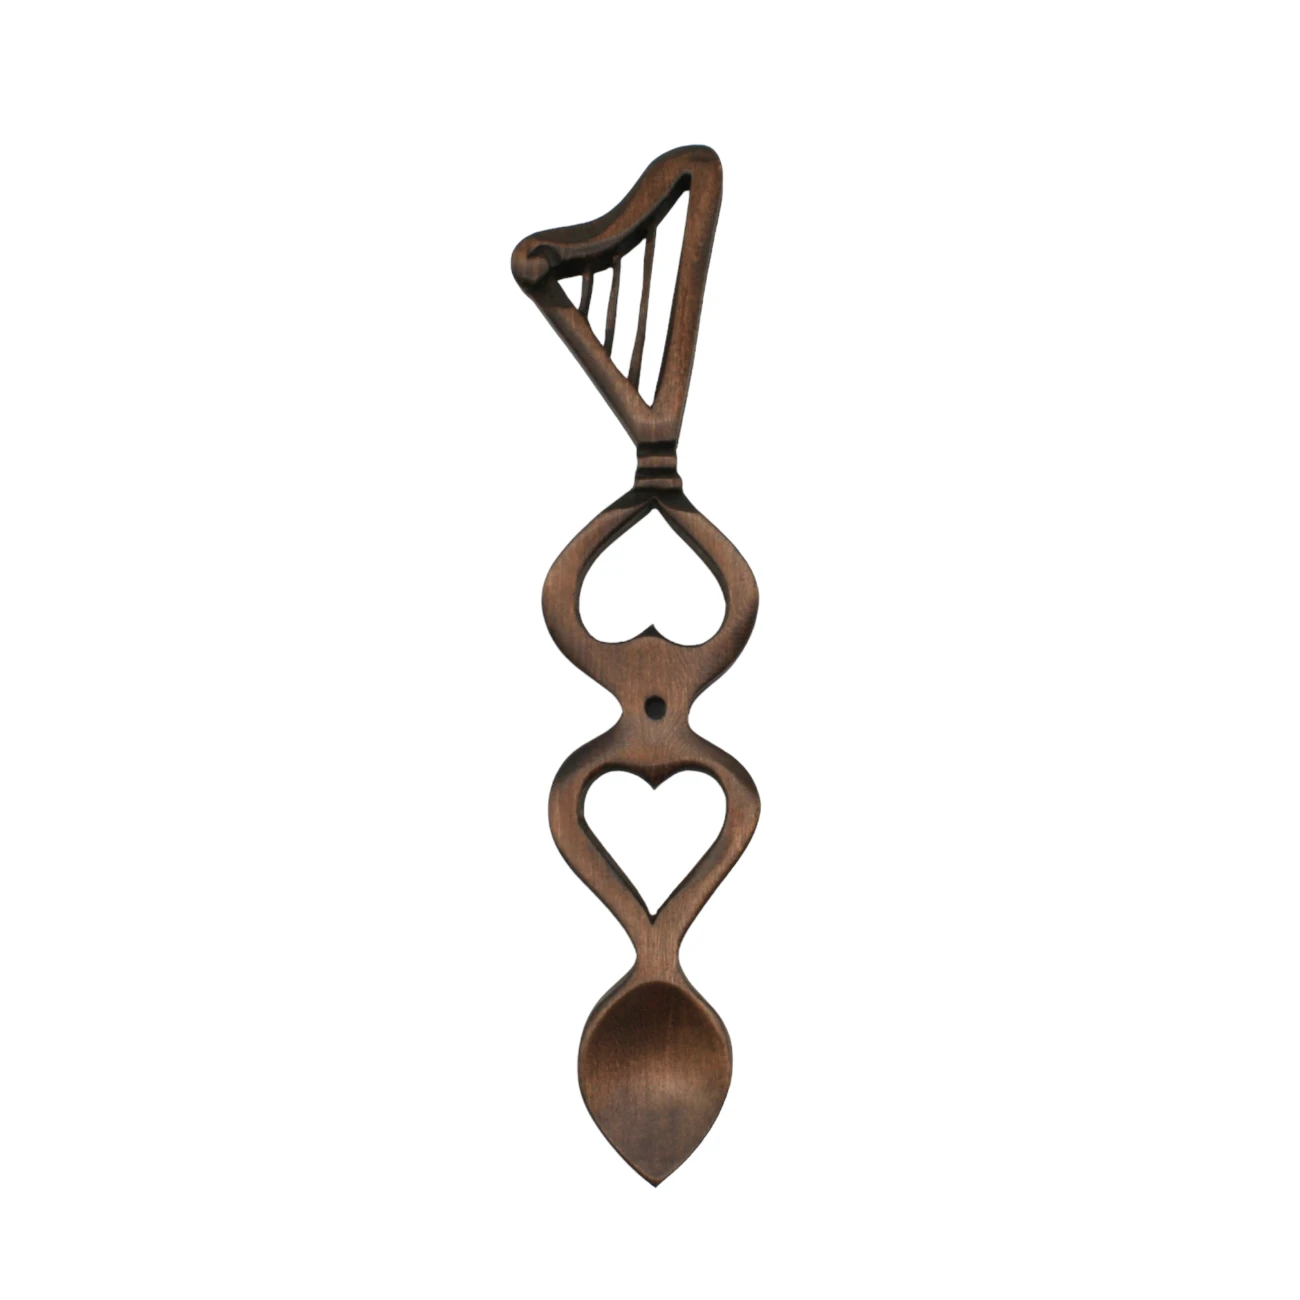 An image of a lovespoon titled Hearts with Harp